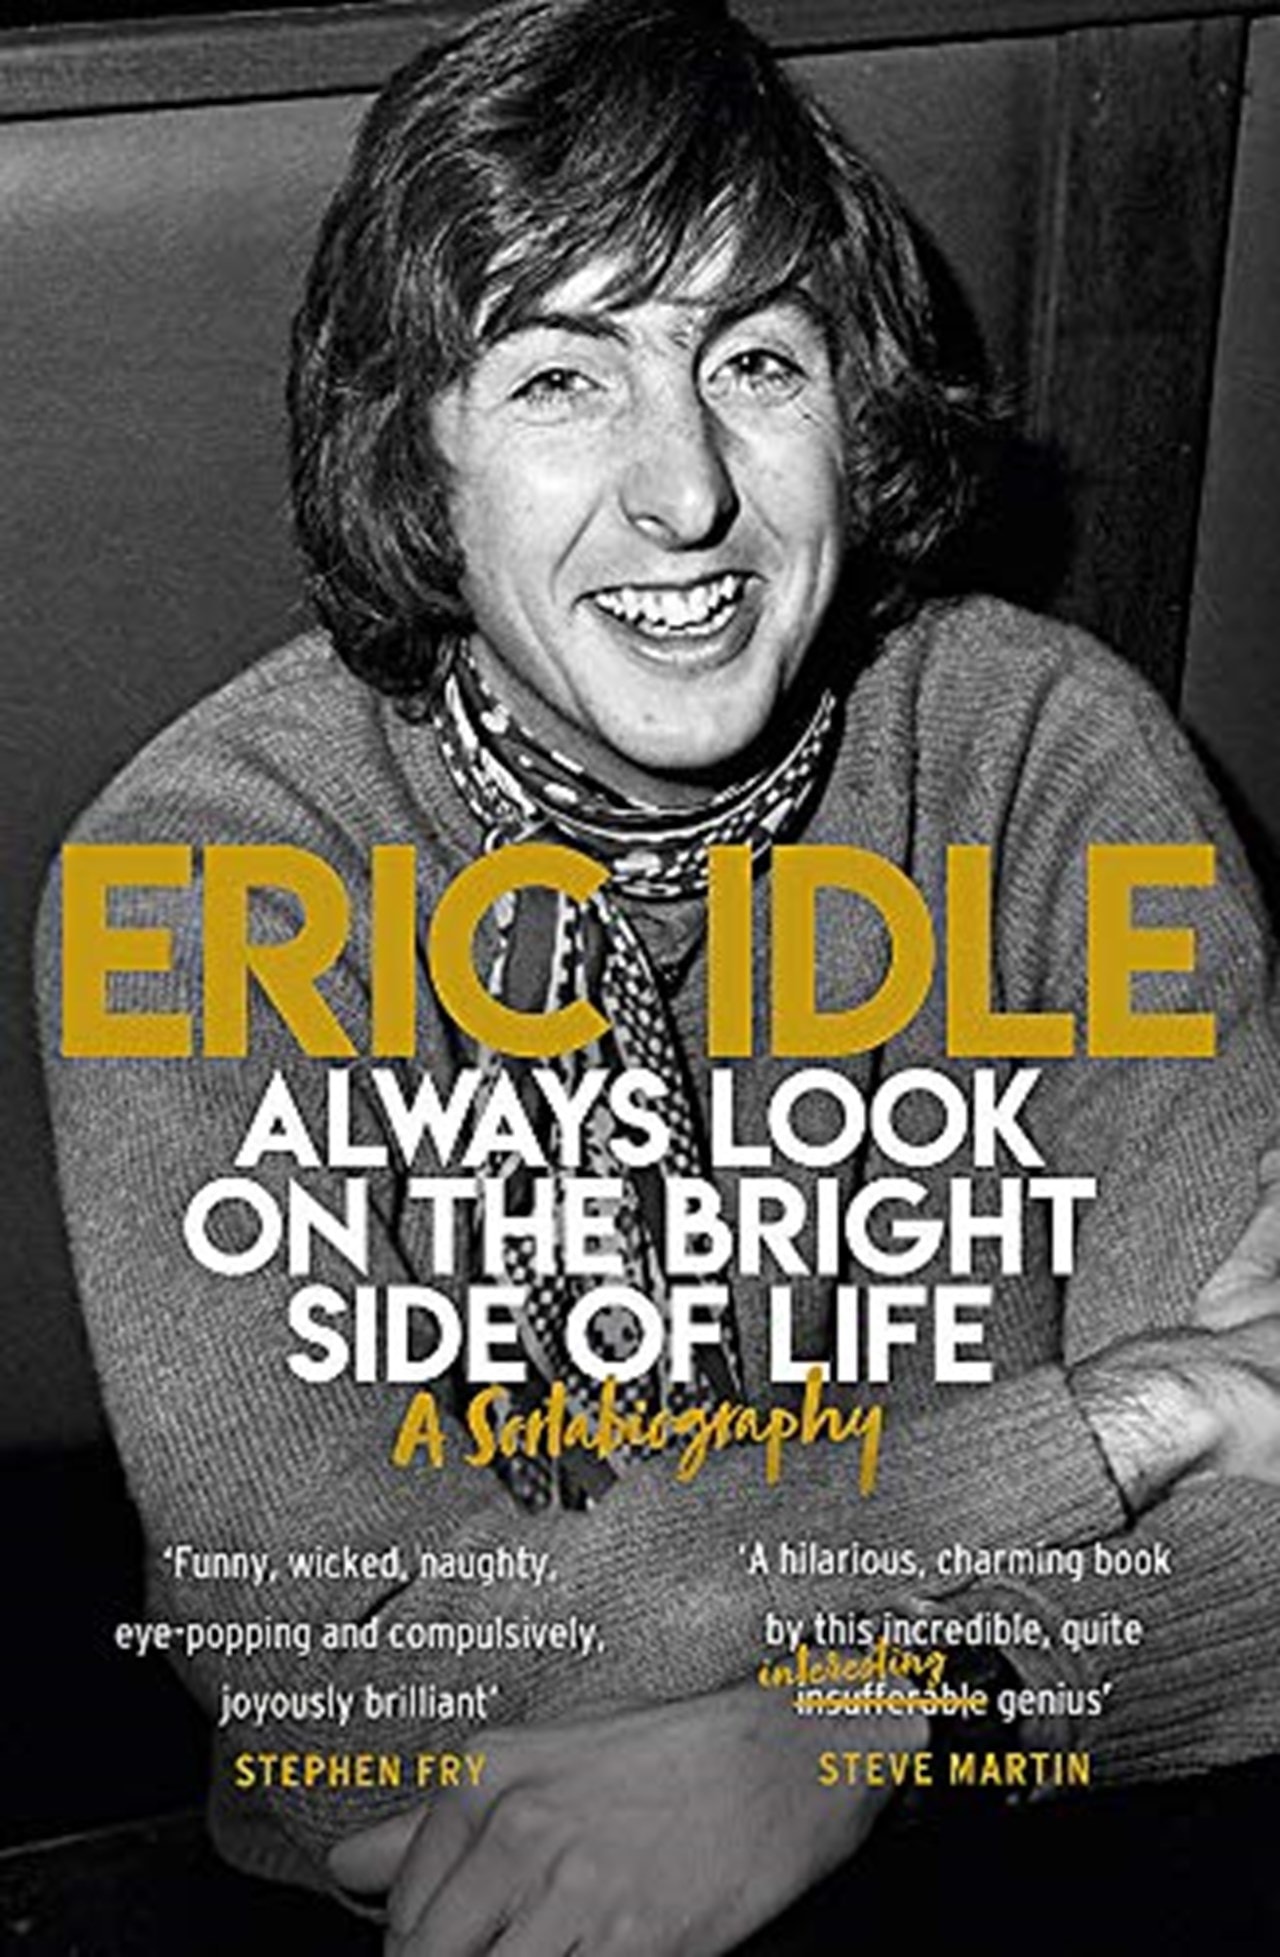 eric idle the bright side of life